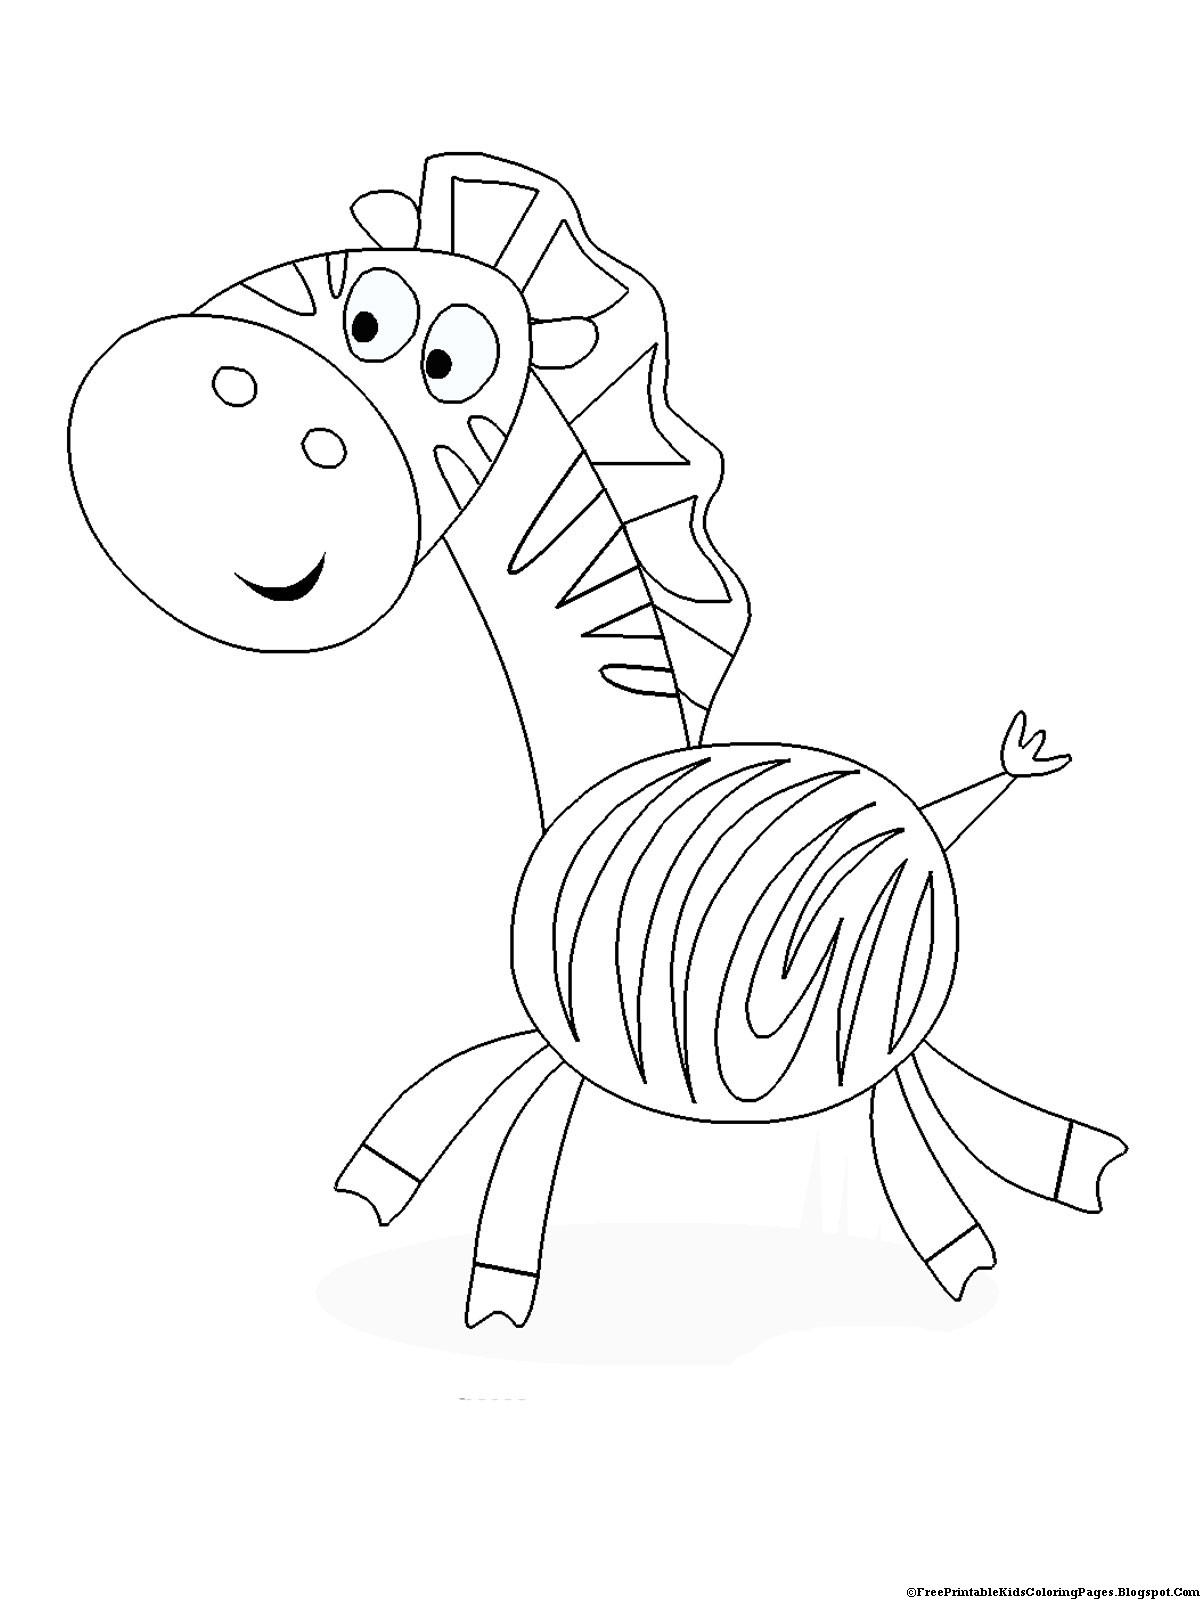 Toddler Coloring Pages
 Zebra Coloring Pages